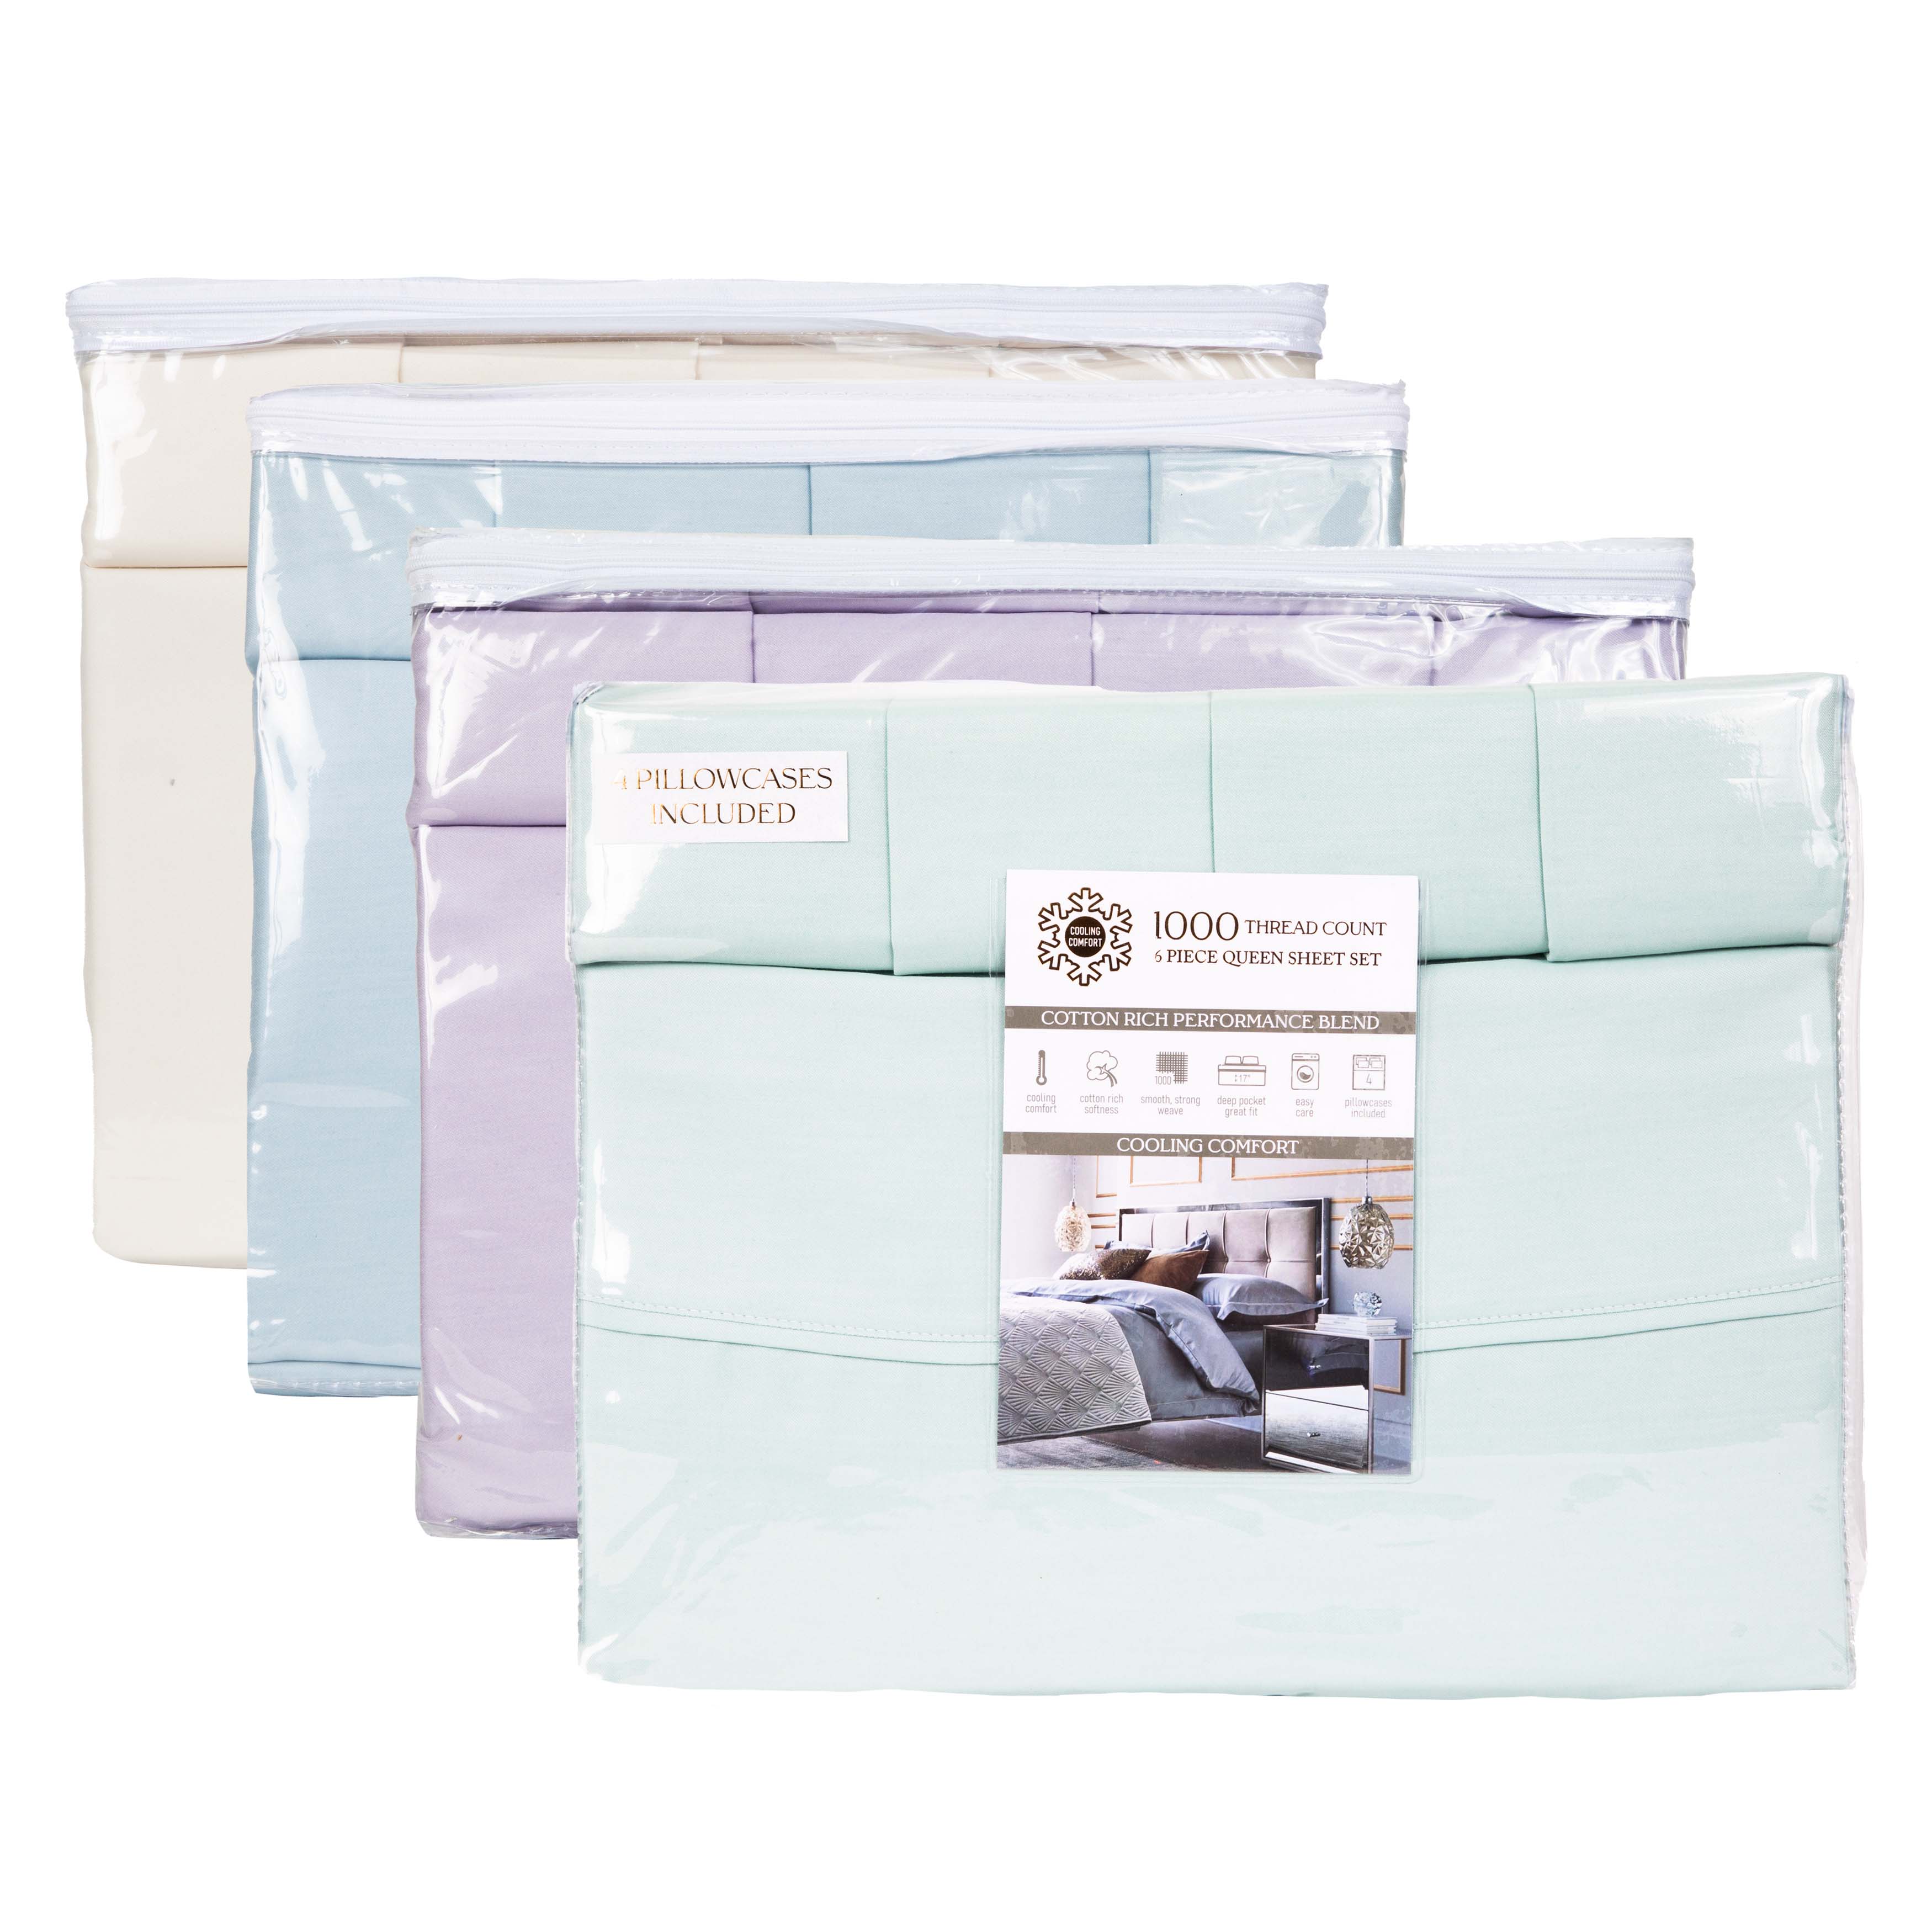 Lulworth Flat Bed Sheets (Pack of 6), 180 Thread Ct. Cotton Poly Blend, Size options - Queen